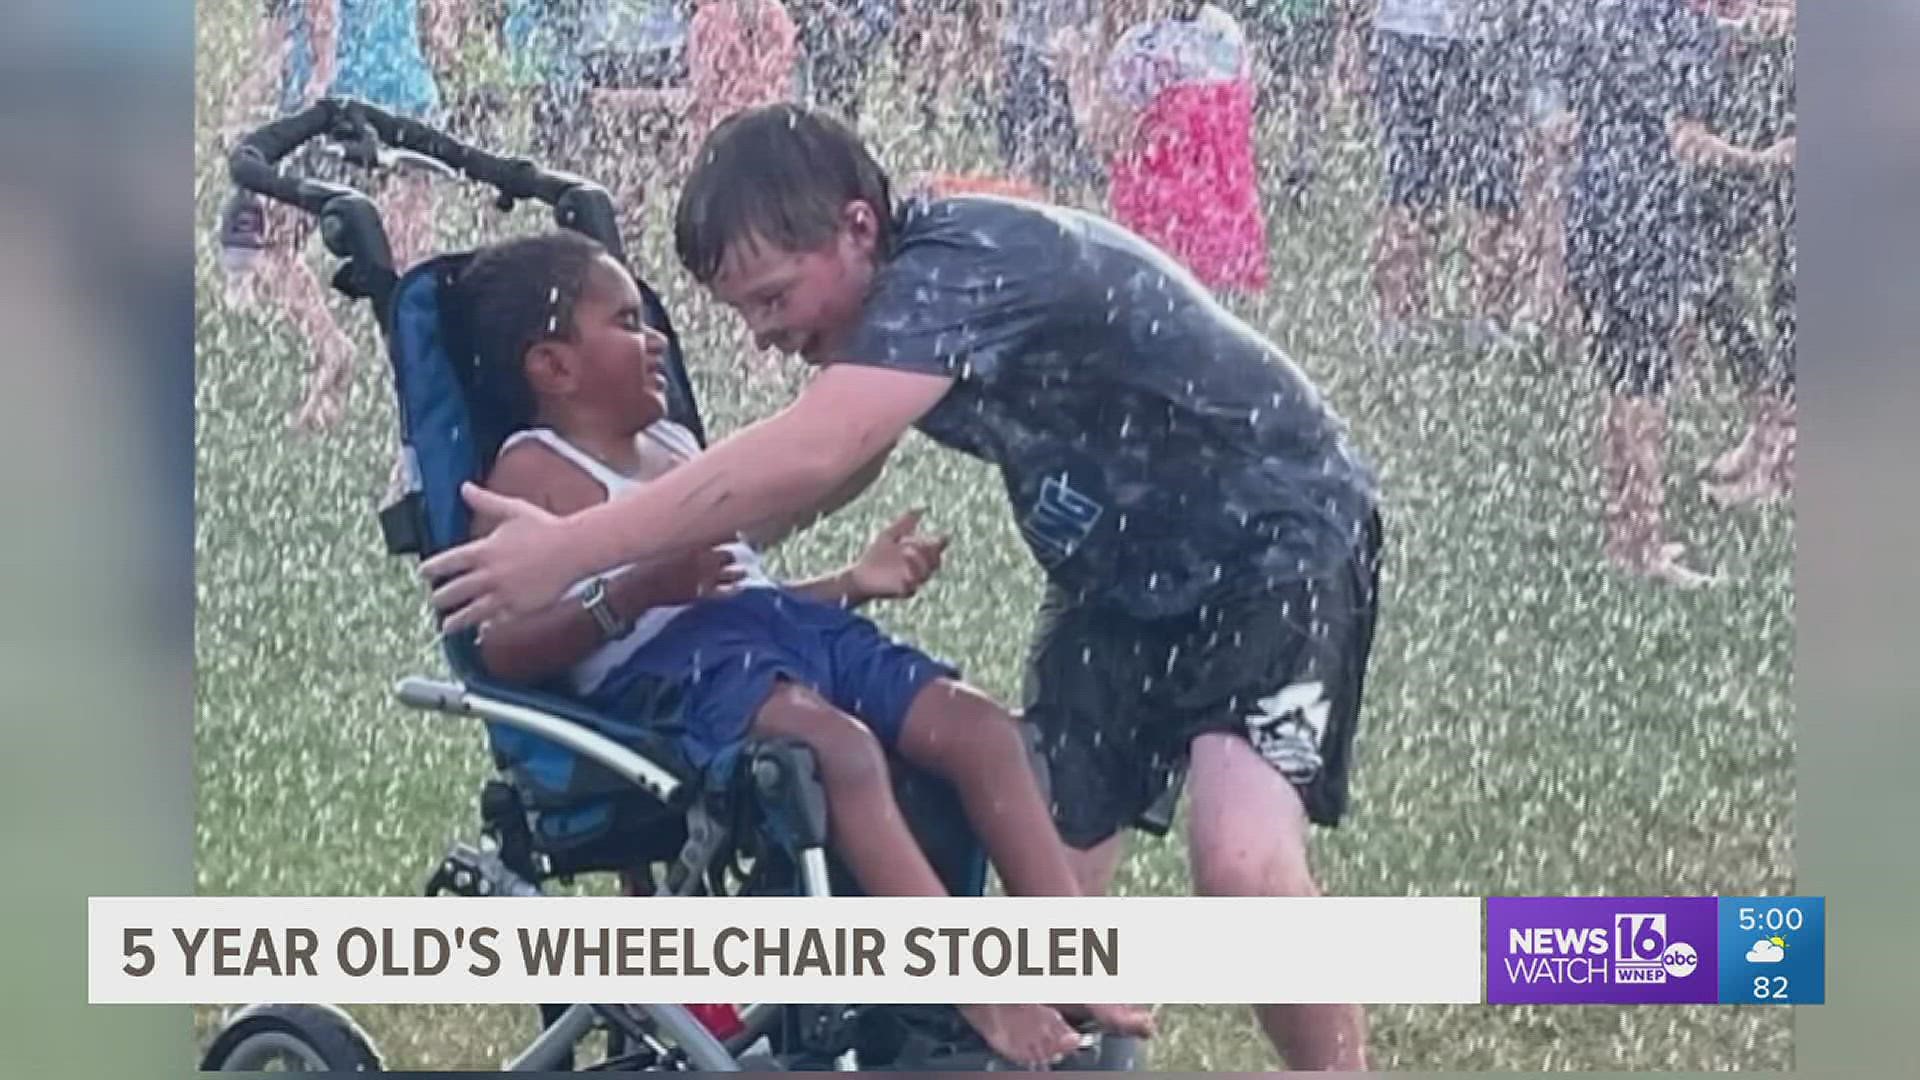 A boy's means of getting around in his everyday life was stolen from his front yard. State police are asking for your help in getting the boy's wheelchair back.